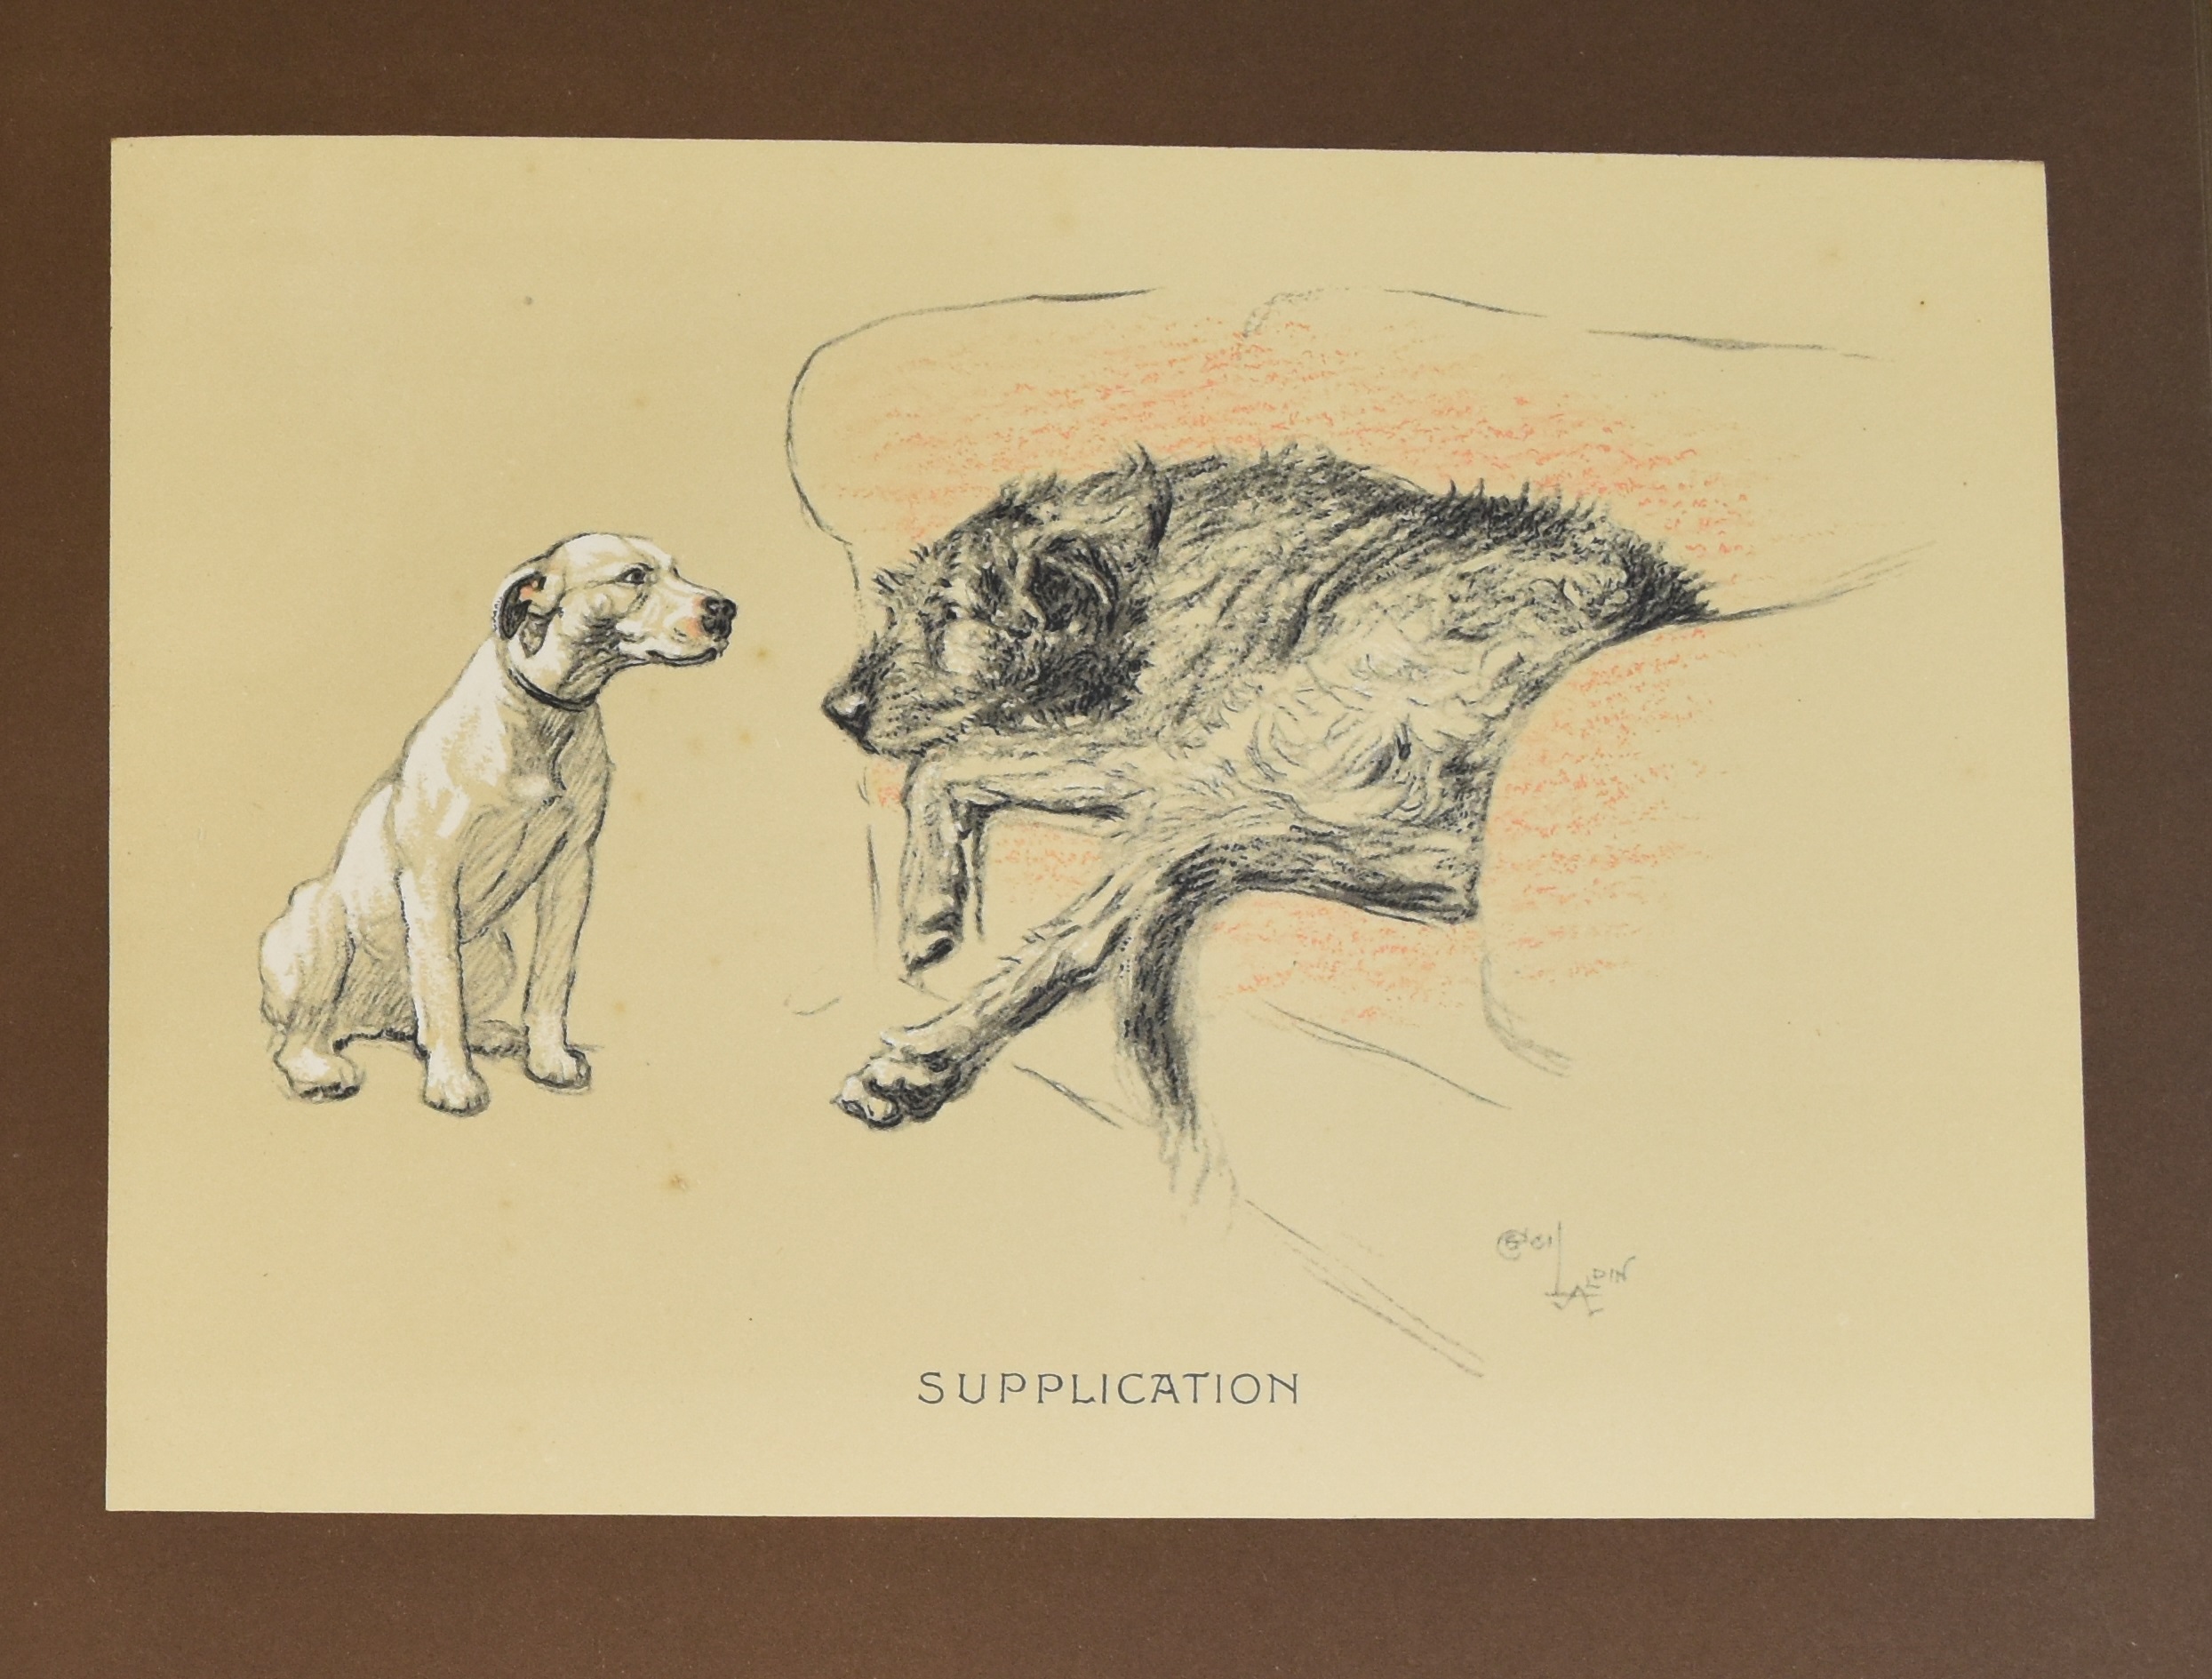 [Dogs] Sleeping Partners A Series of Episodes by Cecil Aldin published Eyre & Spottiswoode (c. - Image 3 of 4